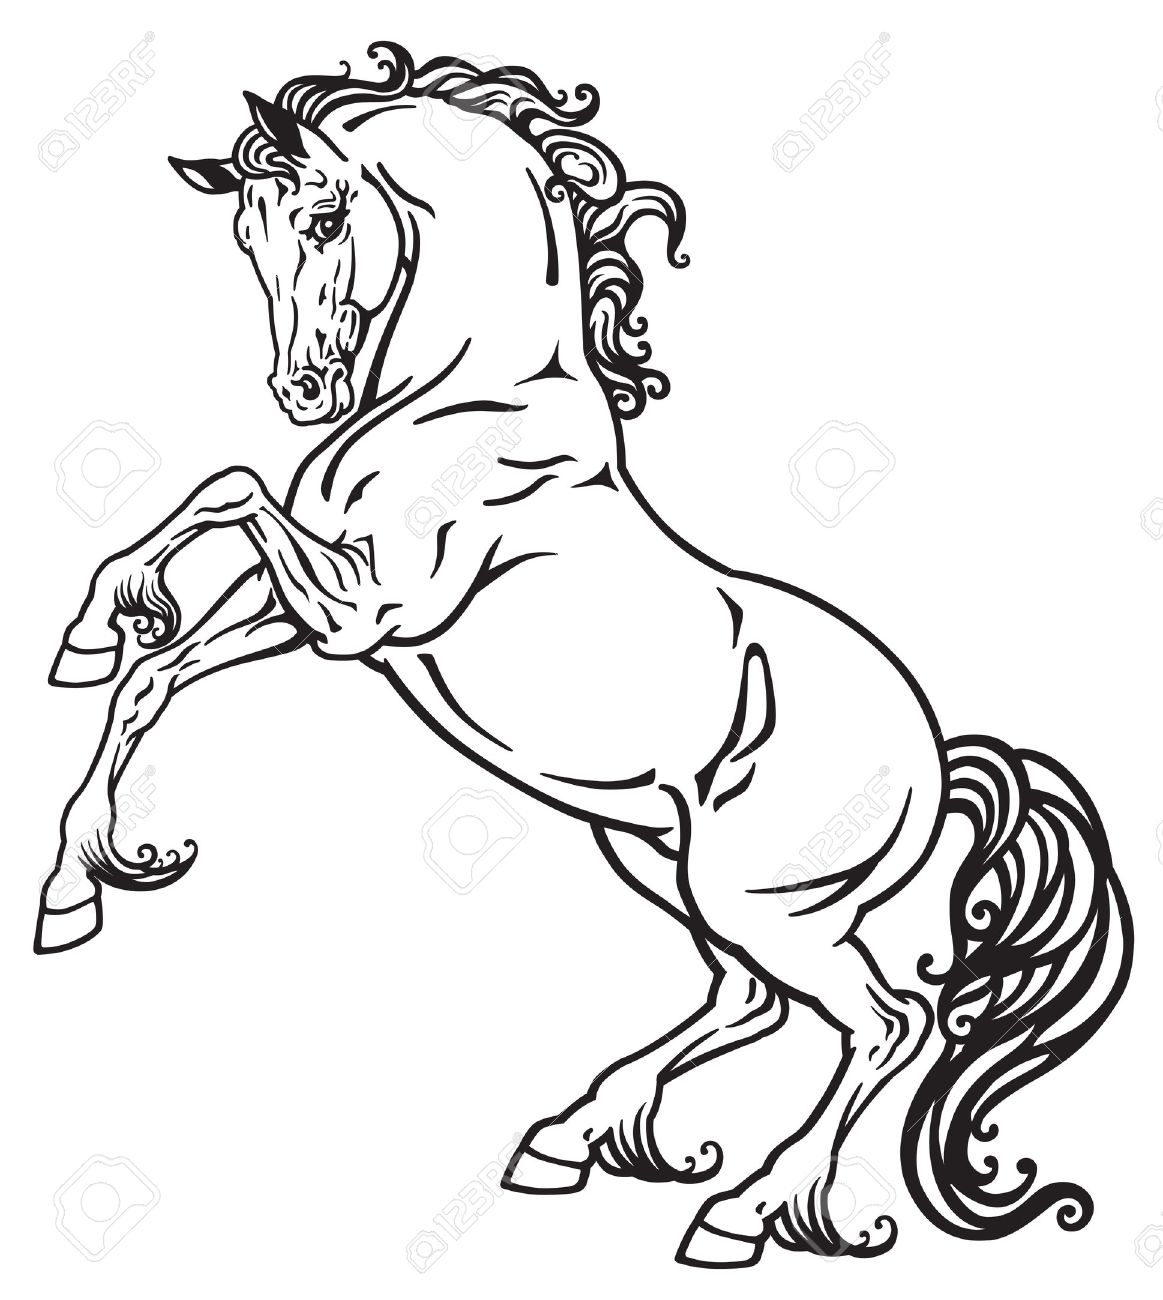 Rearing horse clipart 3 » Clipart Station.